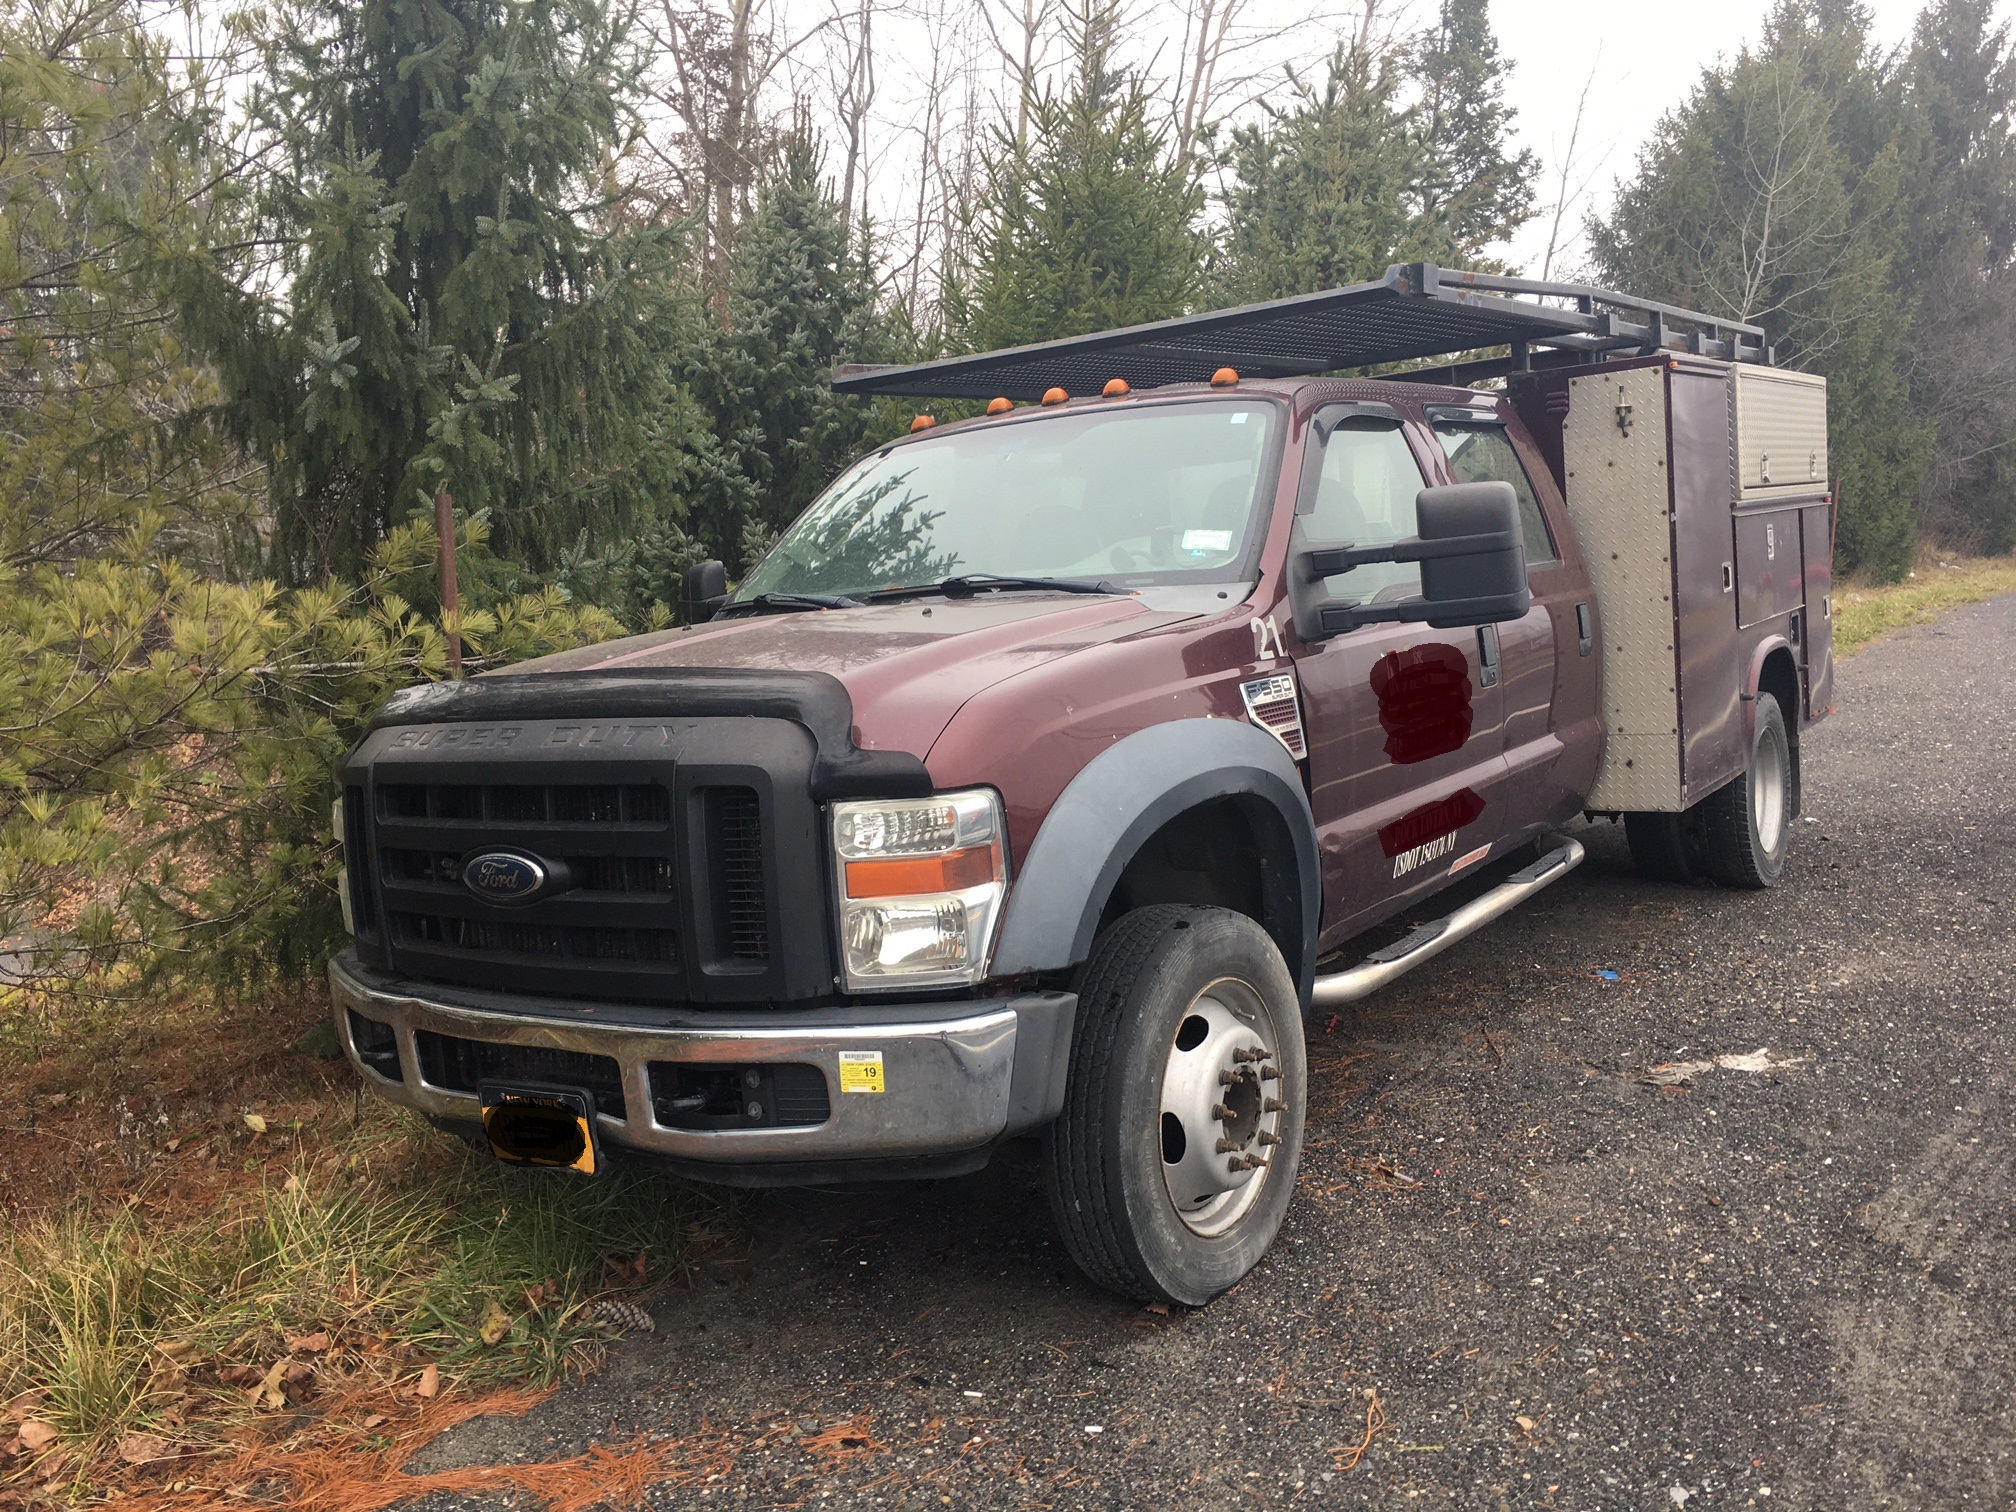 Two Ford 550 trucks. Both are 2009 XL Super Duty service truck models with a 6.4 V 8 power stroke diesel engine. Automatic transmission and an 11 foot tool rack utility box. On this truck shown the engine runs but needs 2 cylinders rebuilt. Asking $19'500. The second identical truck to the one shown runs well on a daily basis with no issue. Second truck photos not shown. Asking $25'500. Both trucks have approximately 170K miles. Both trucks could be purchased together for an asking price of $36'000